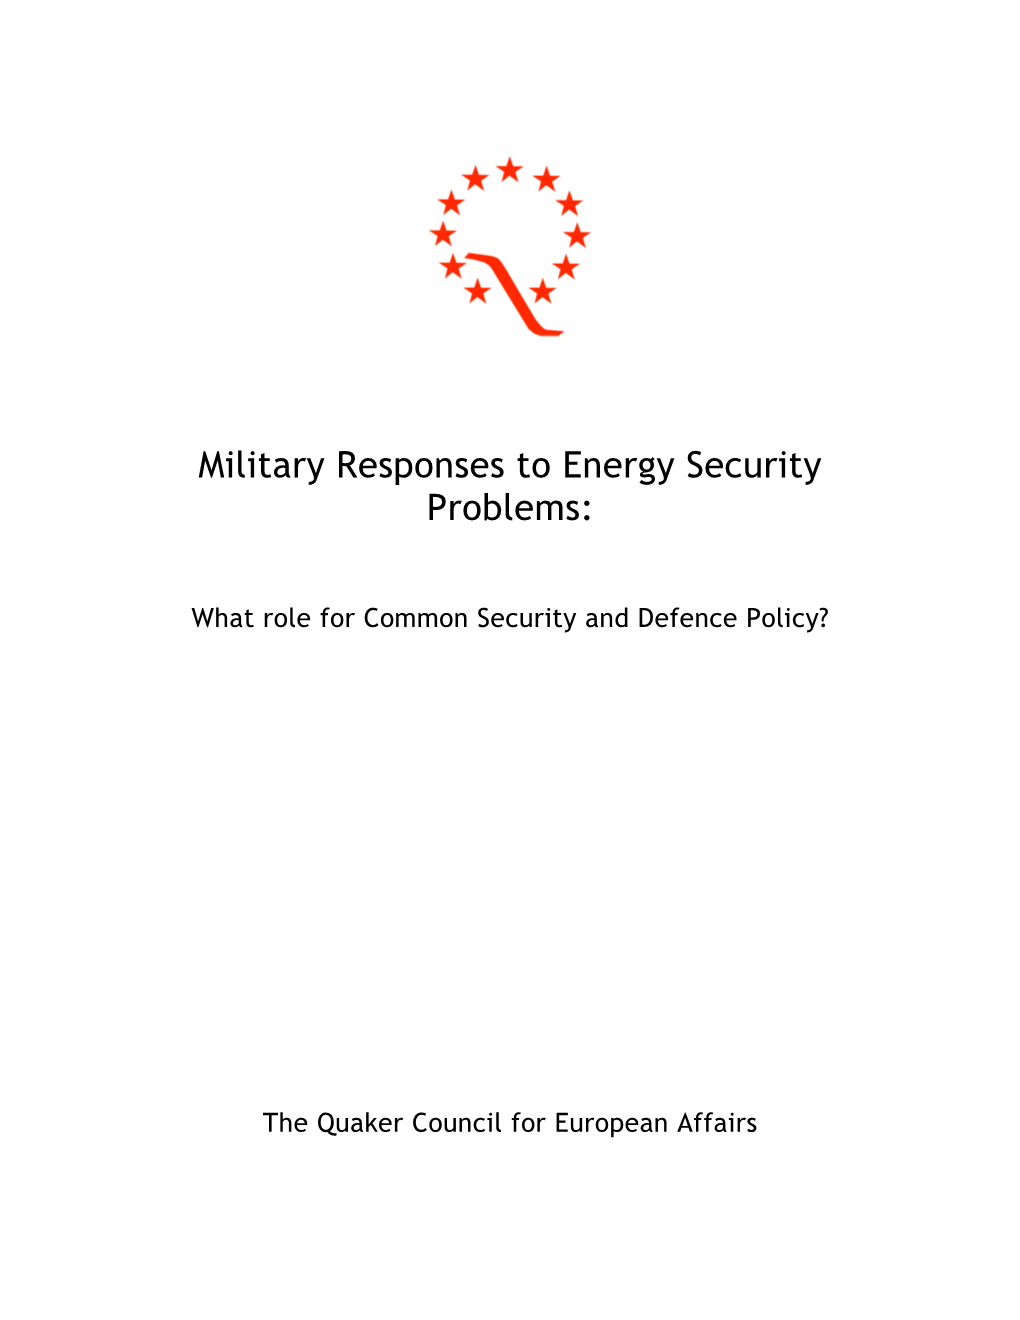 Military Responses to Energy Security Problems: What Role for Common